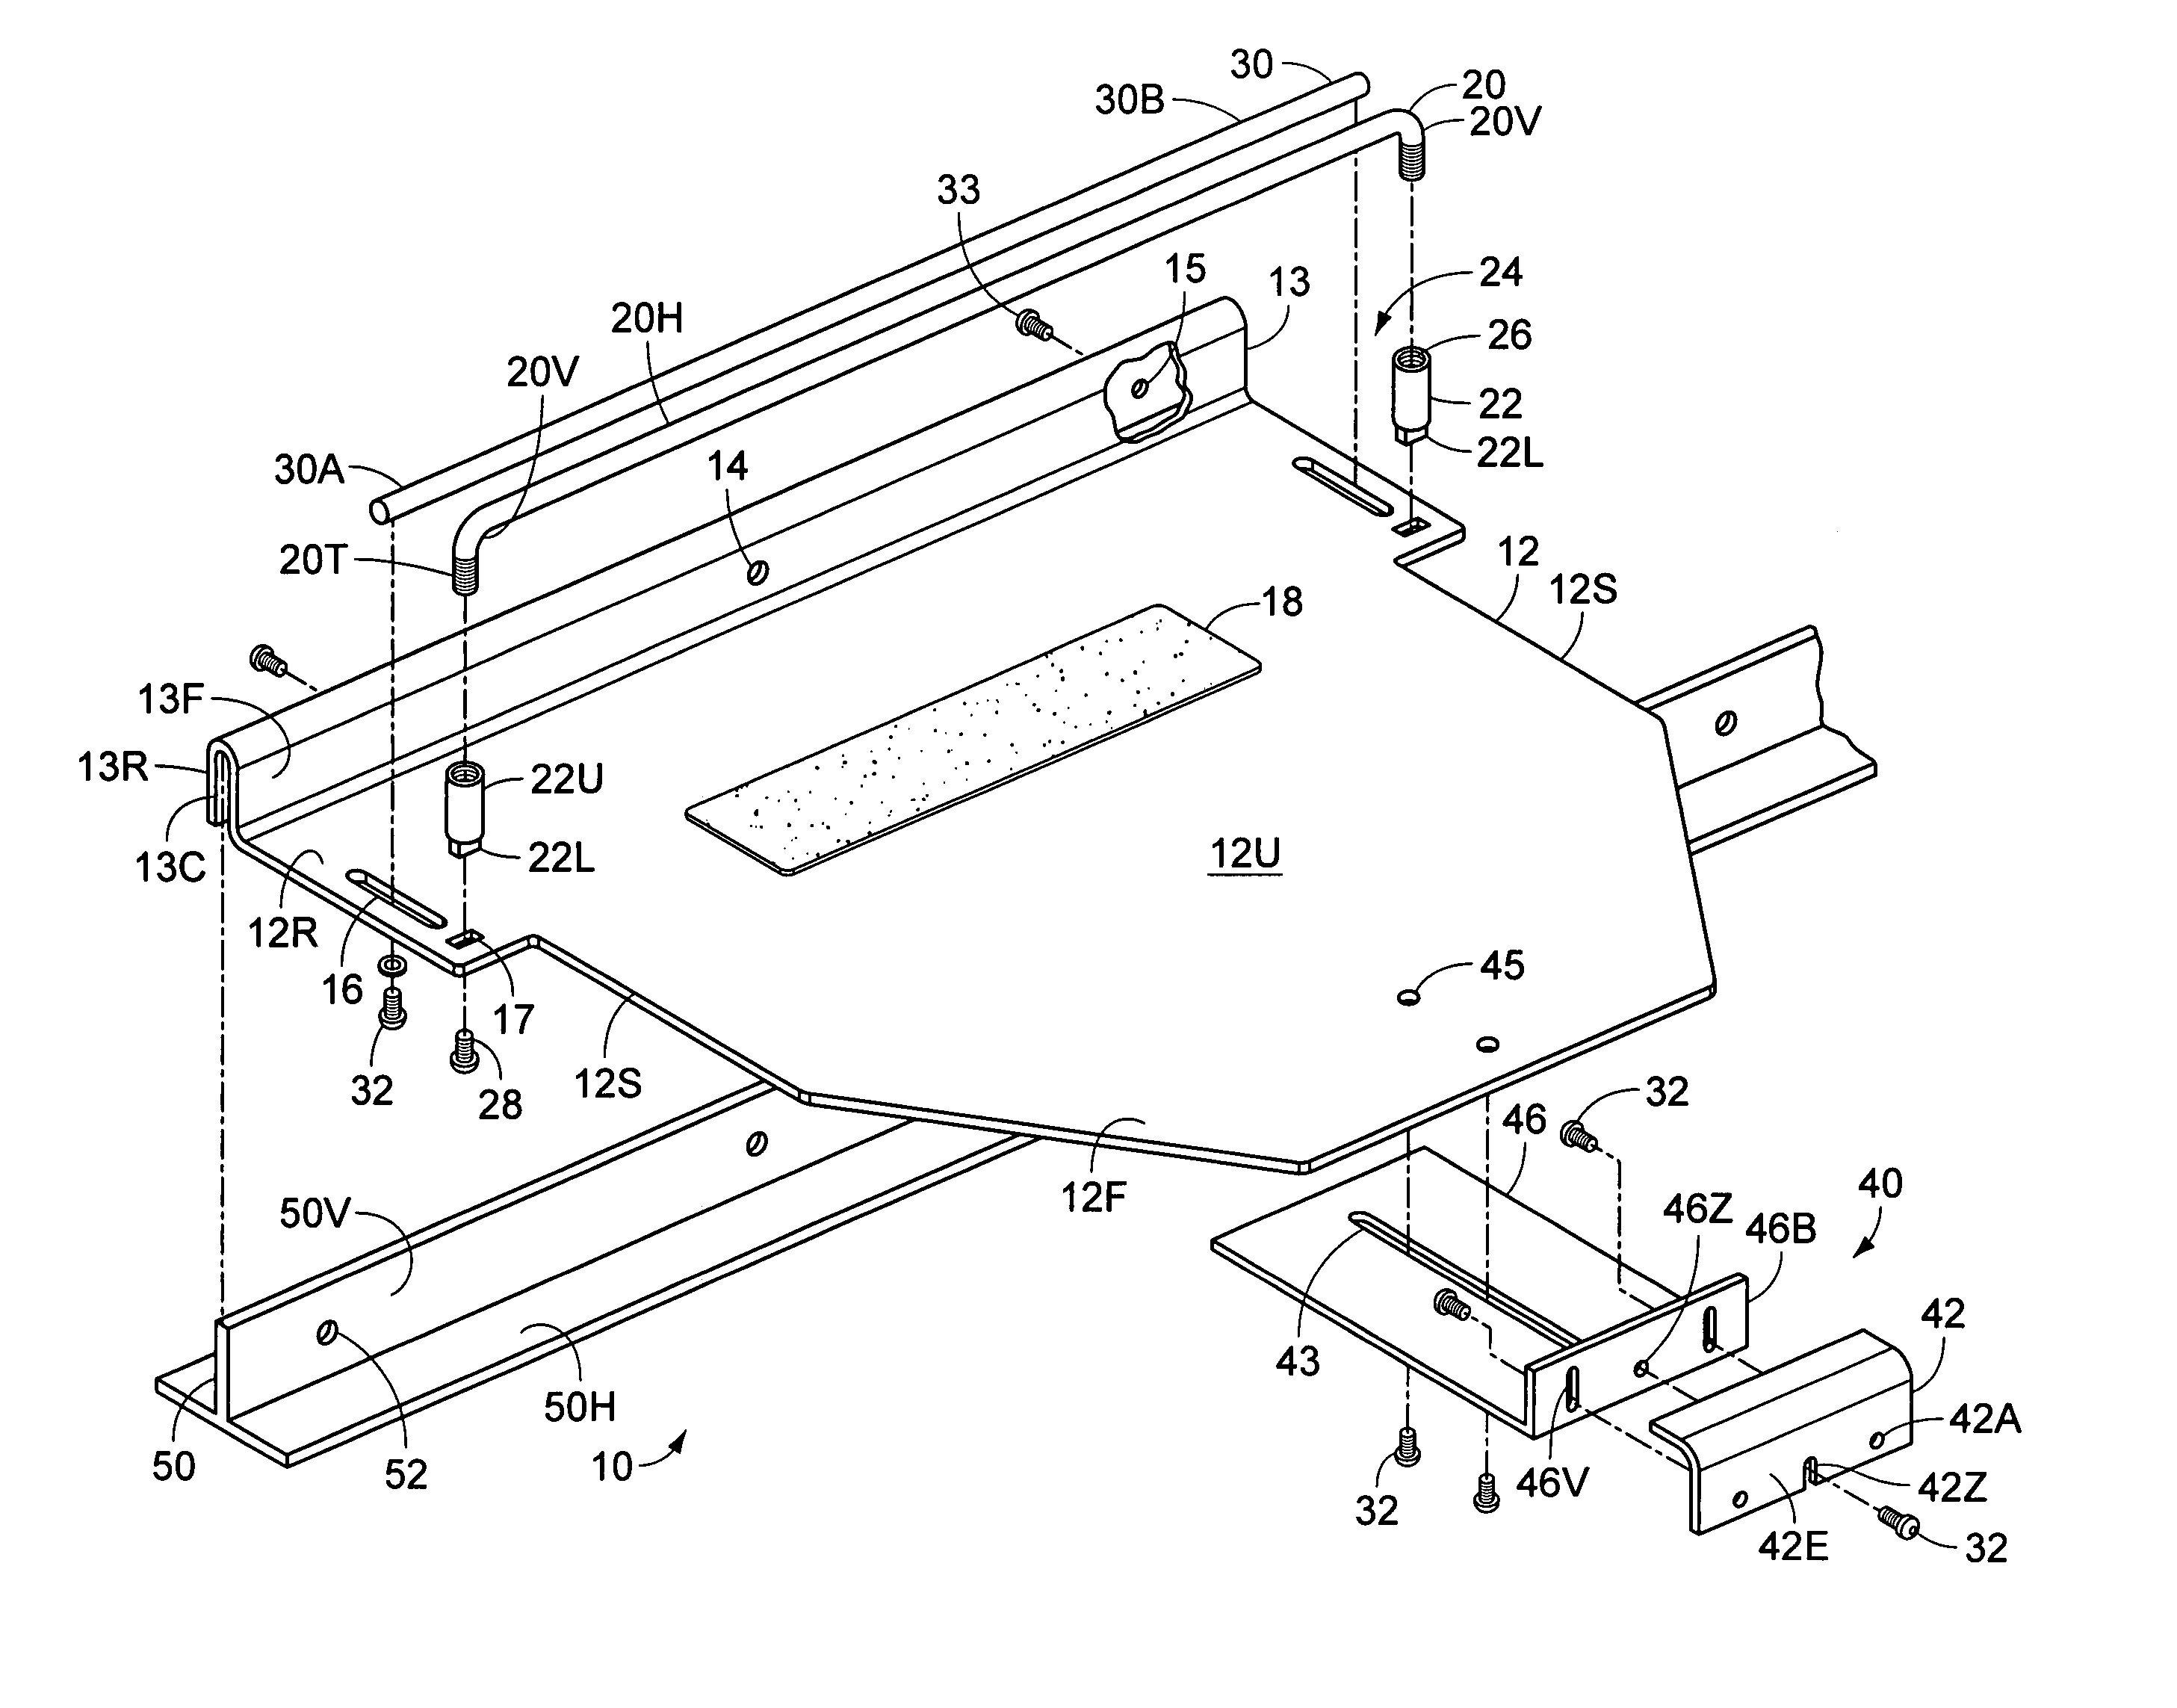 Merchandise display and anti-theft system